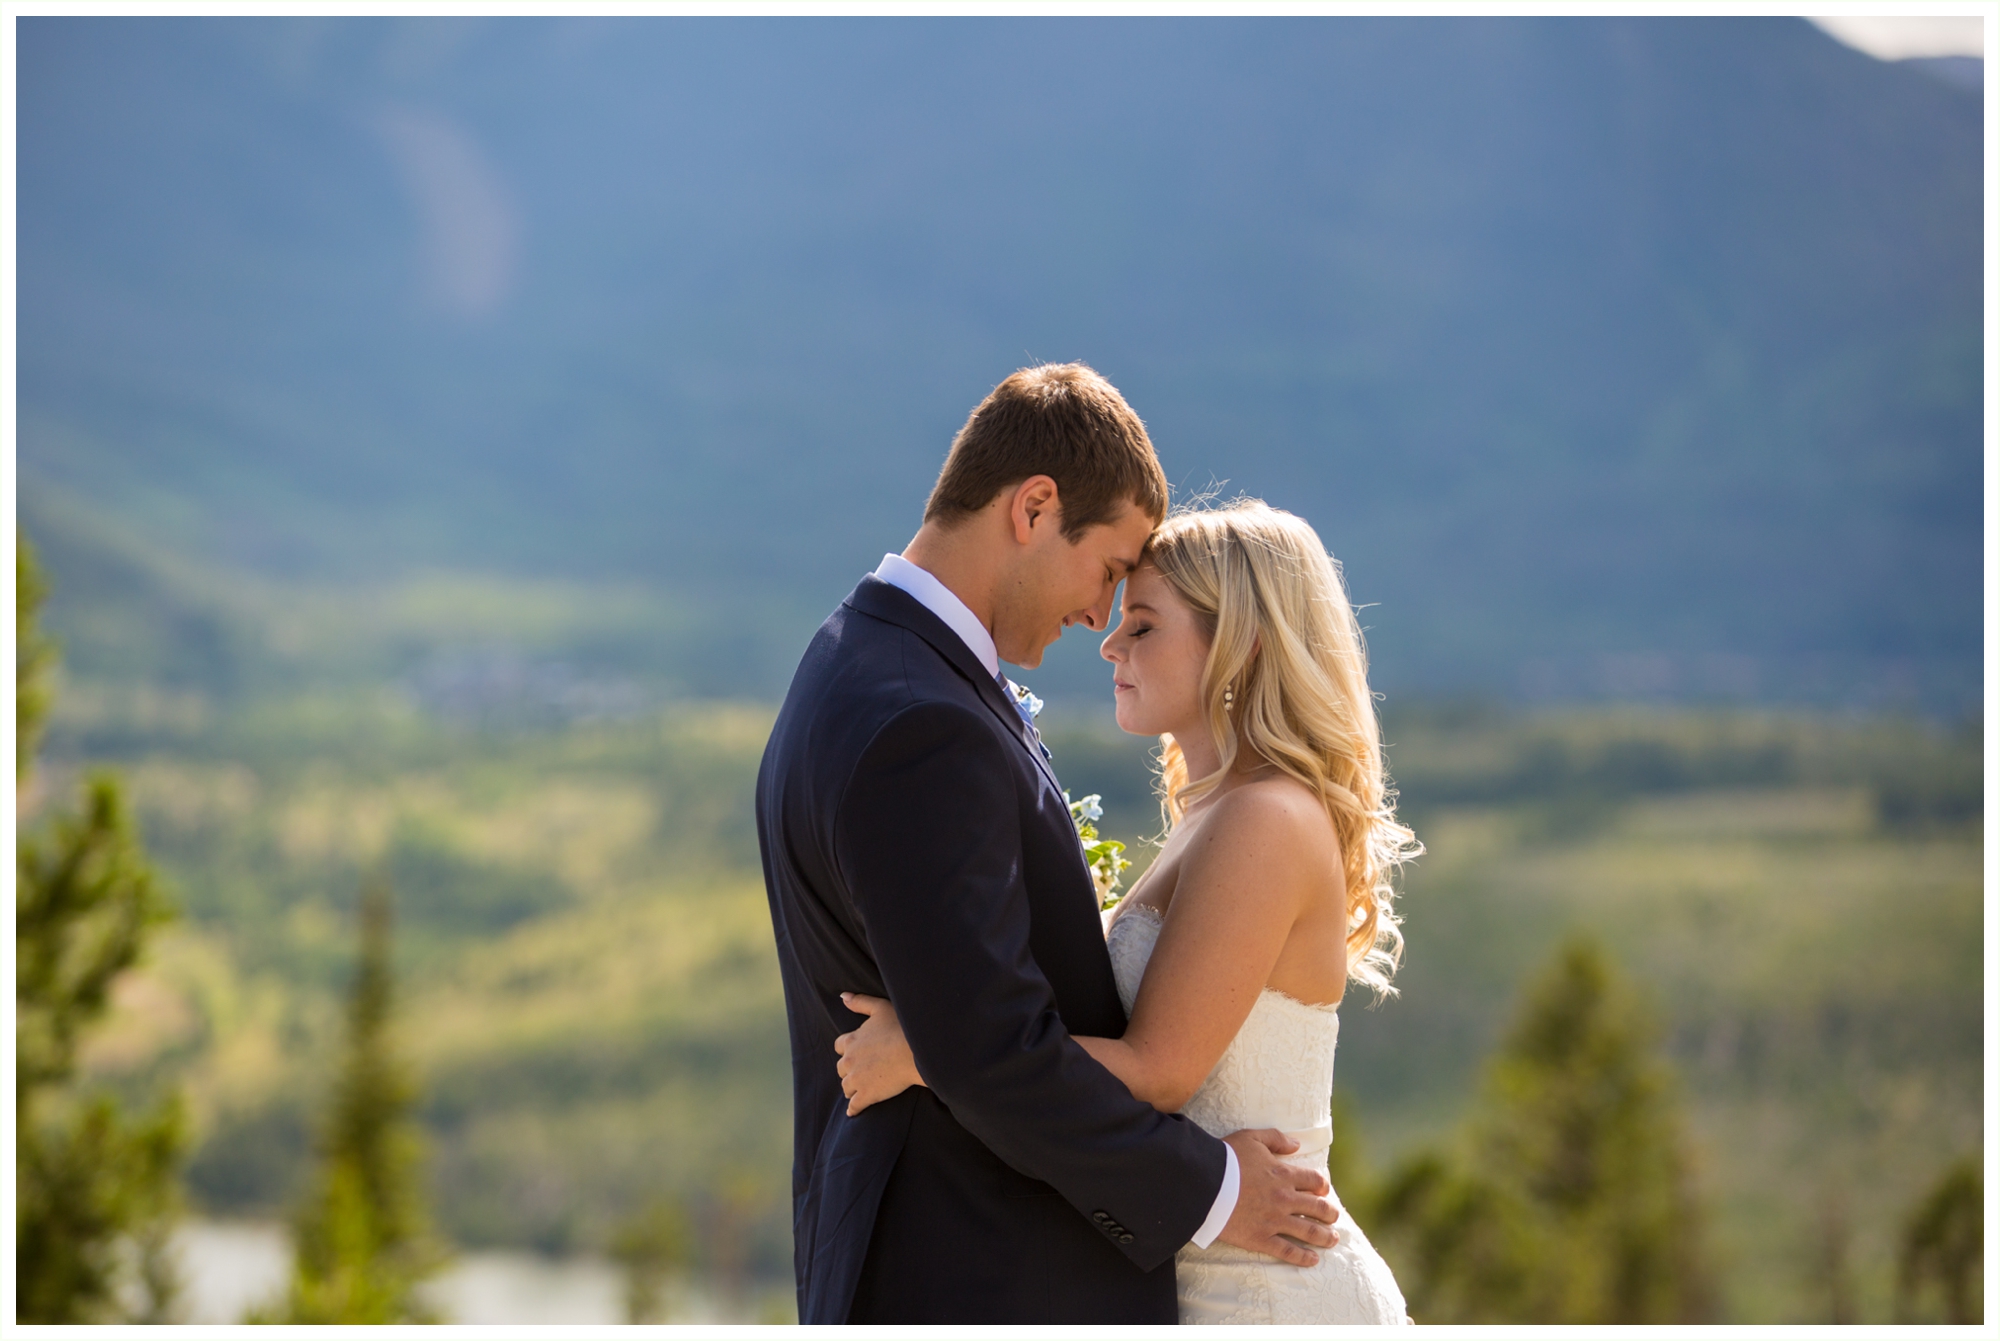 bride and groom outdoor wedding portraits at sapphire point overlook lake dillon